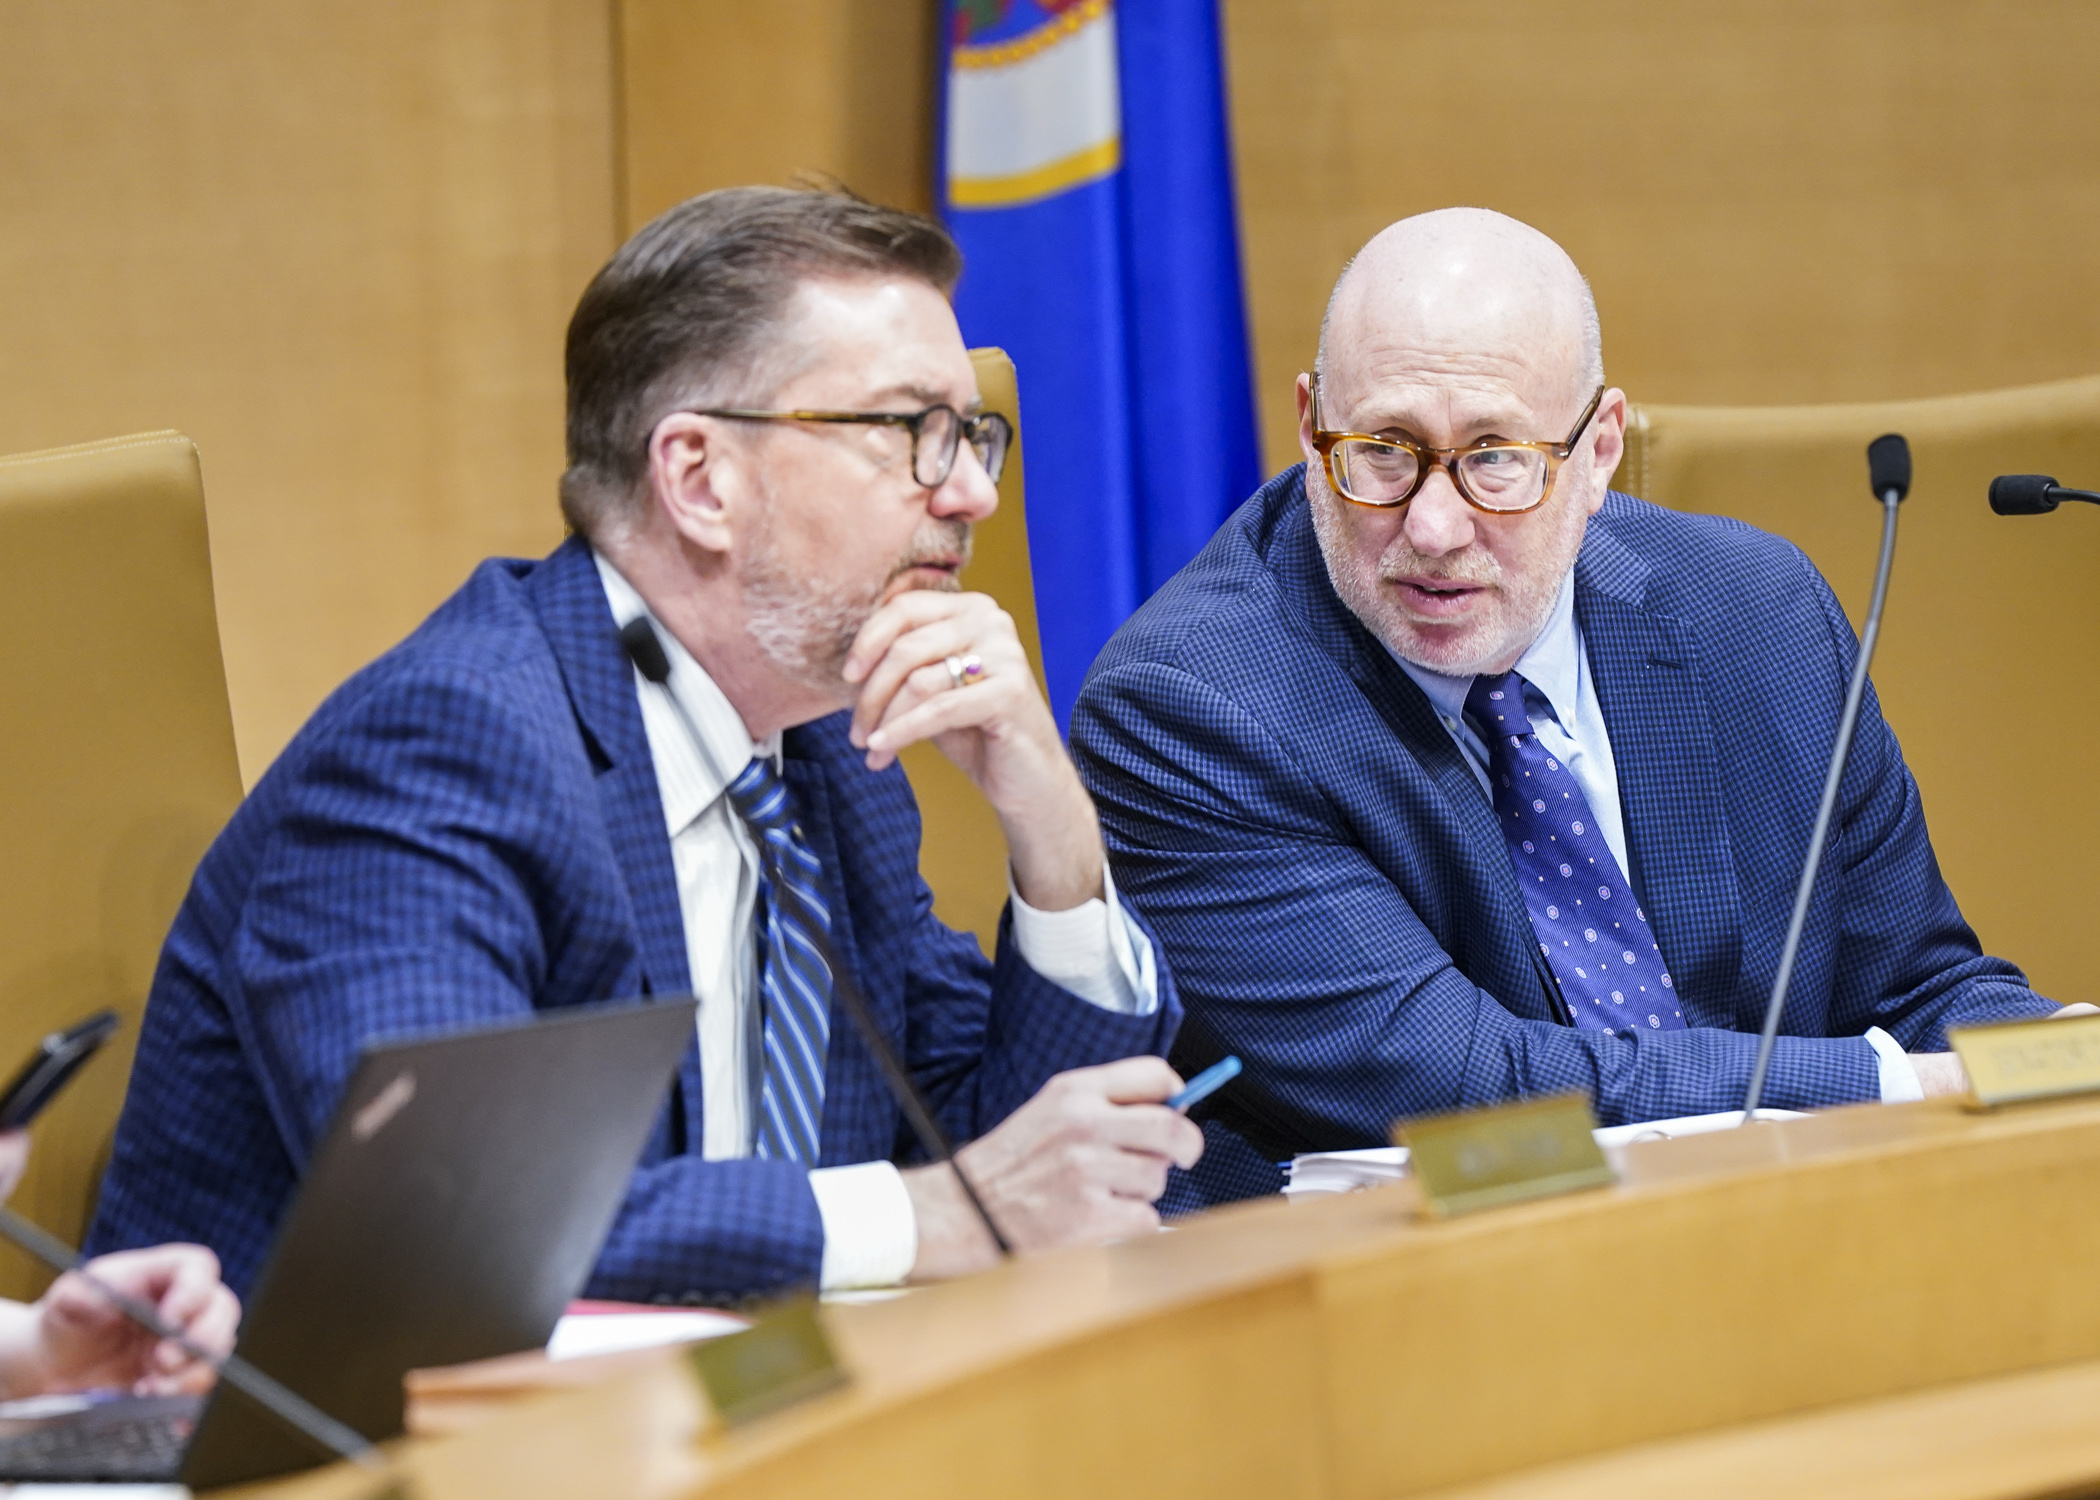 Sen. D. Scott Dibble and Rep. Frank Hornstein confer before the transportation conference committee begins May 3. The Minneapolis DFLers co-chair the committee. (Photo by Catherine Davis)